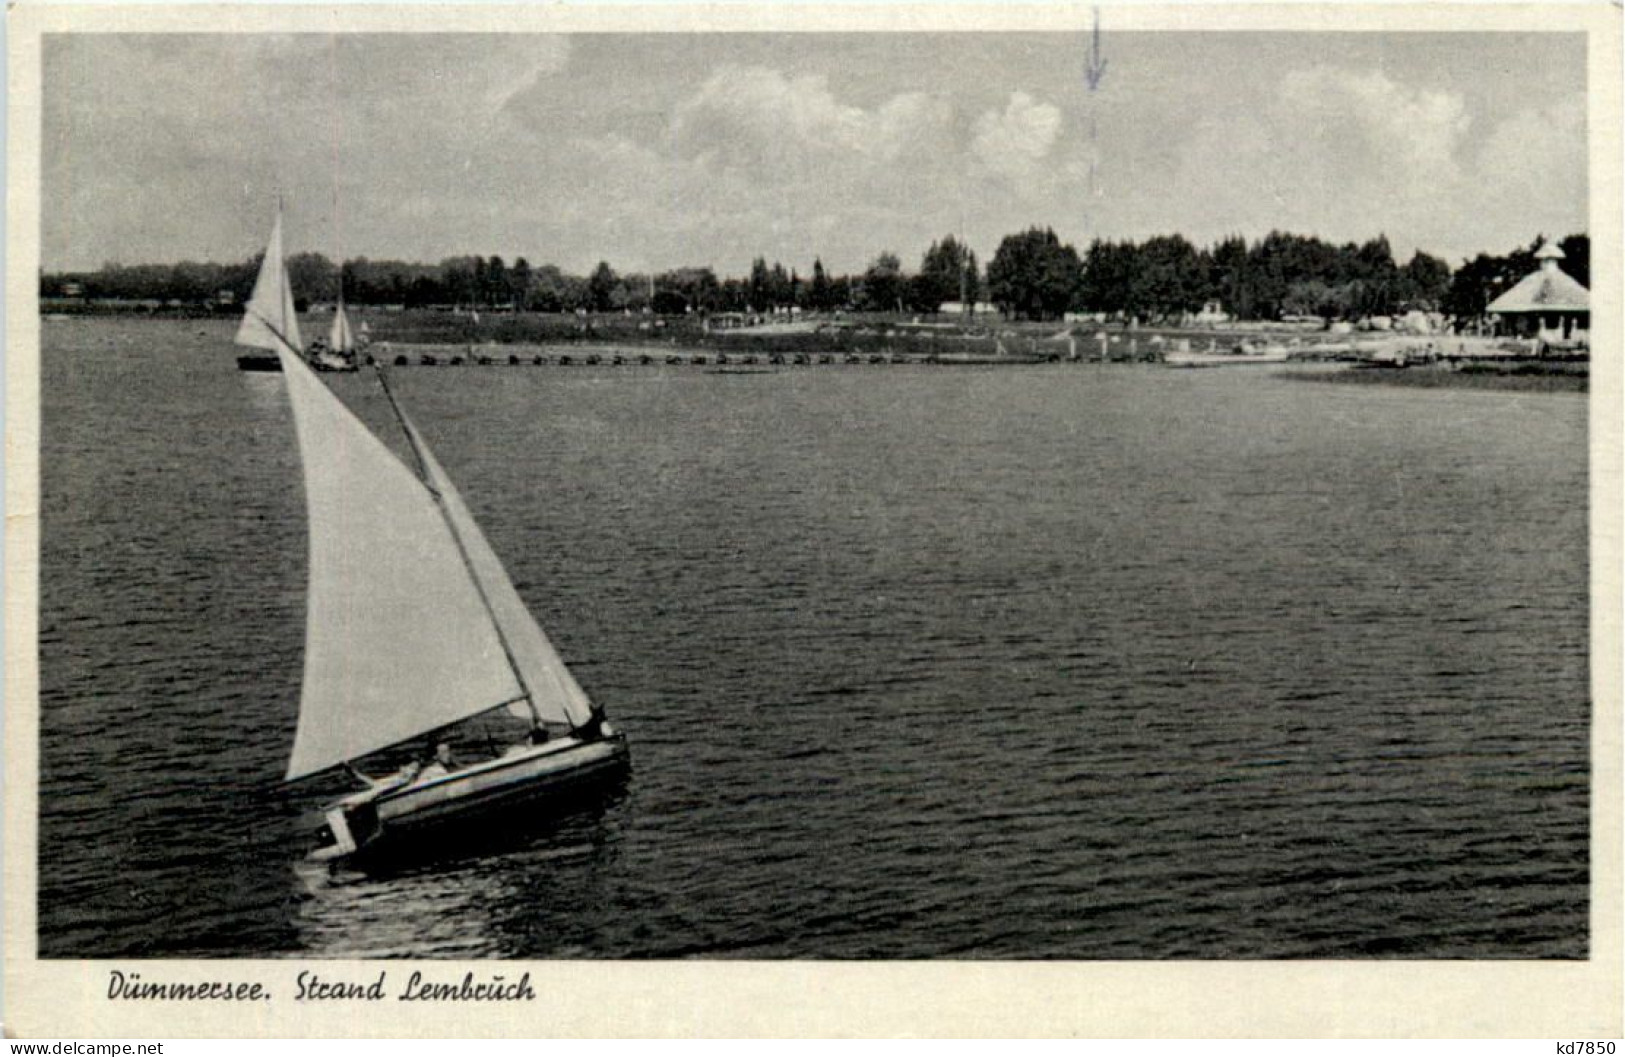 Dümmersee - Strand Lembruch - Diepholz